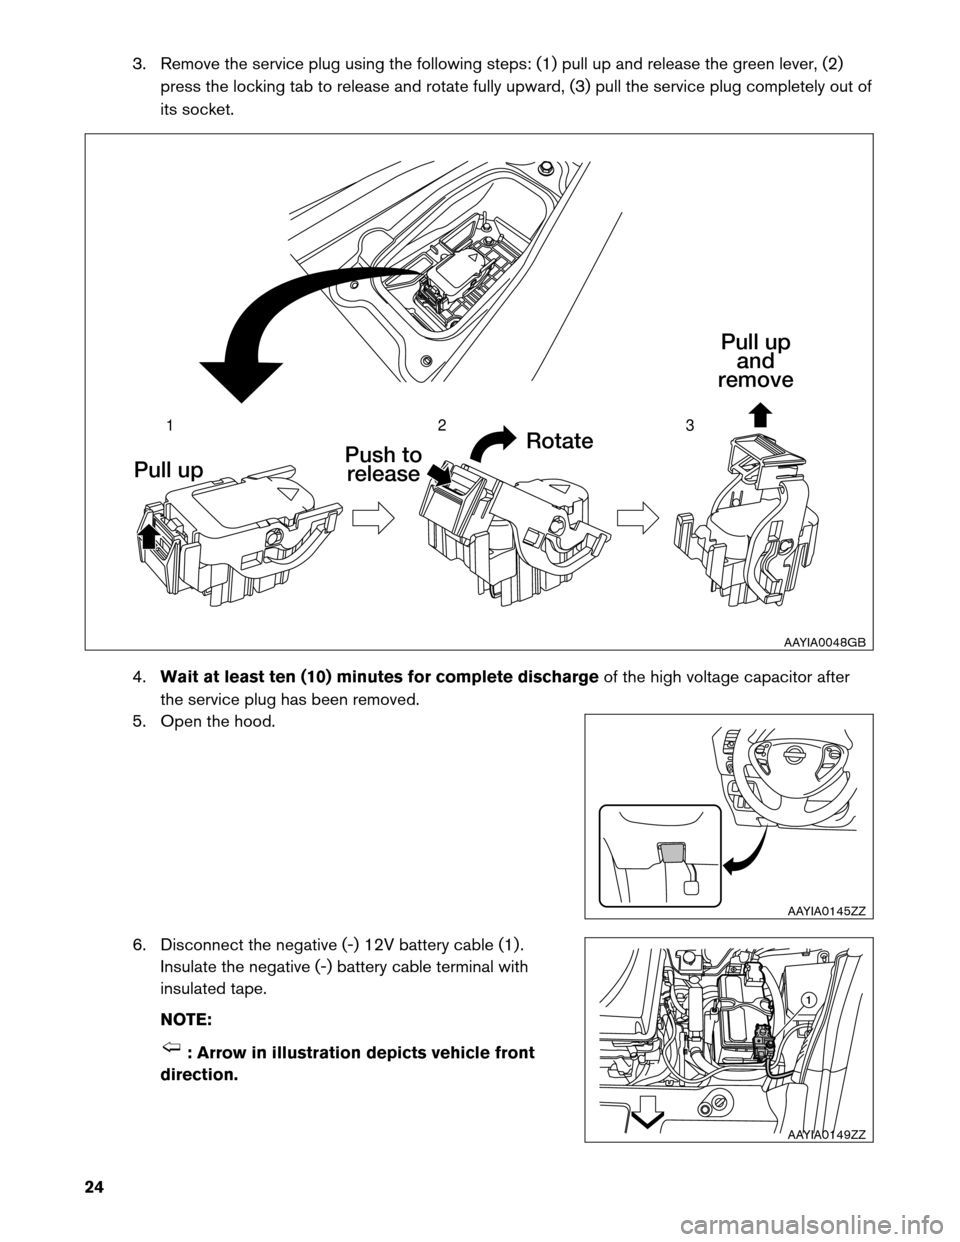 NISSAN LEAF 2013 1.G Dismantling Guide 3. Remove the service plug using the following steps: (1) pull up and release the green lever, (2)
press the locking tab to release and rotate fully upward, (3) pull the service plug completely out of